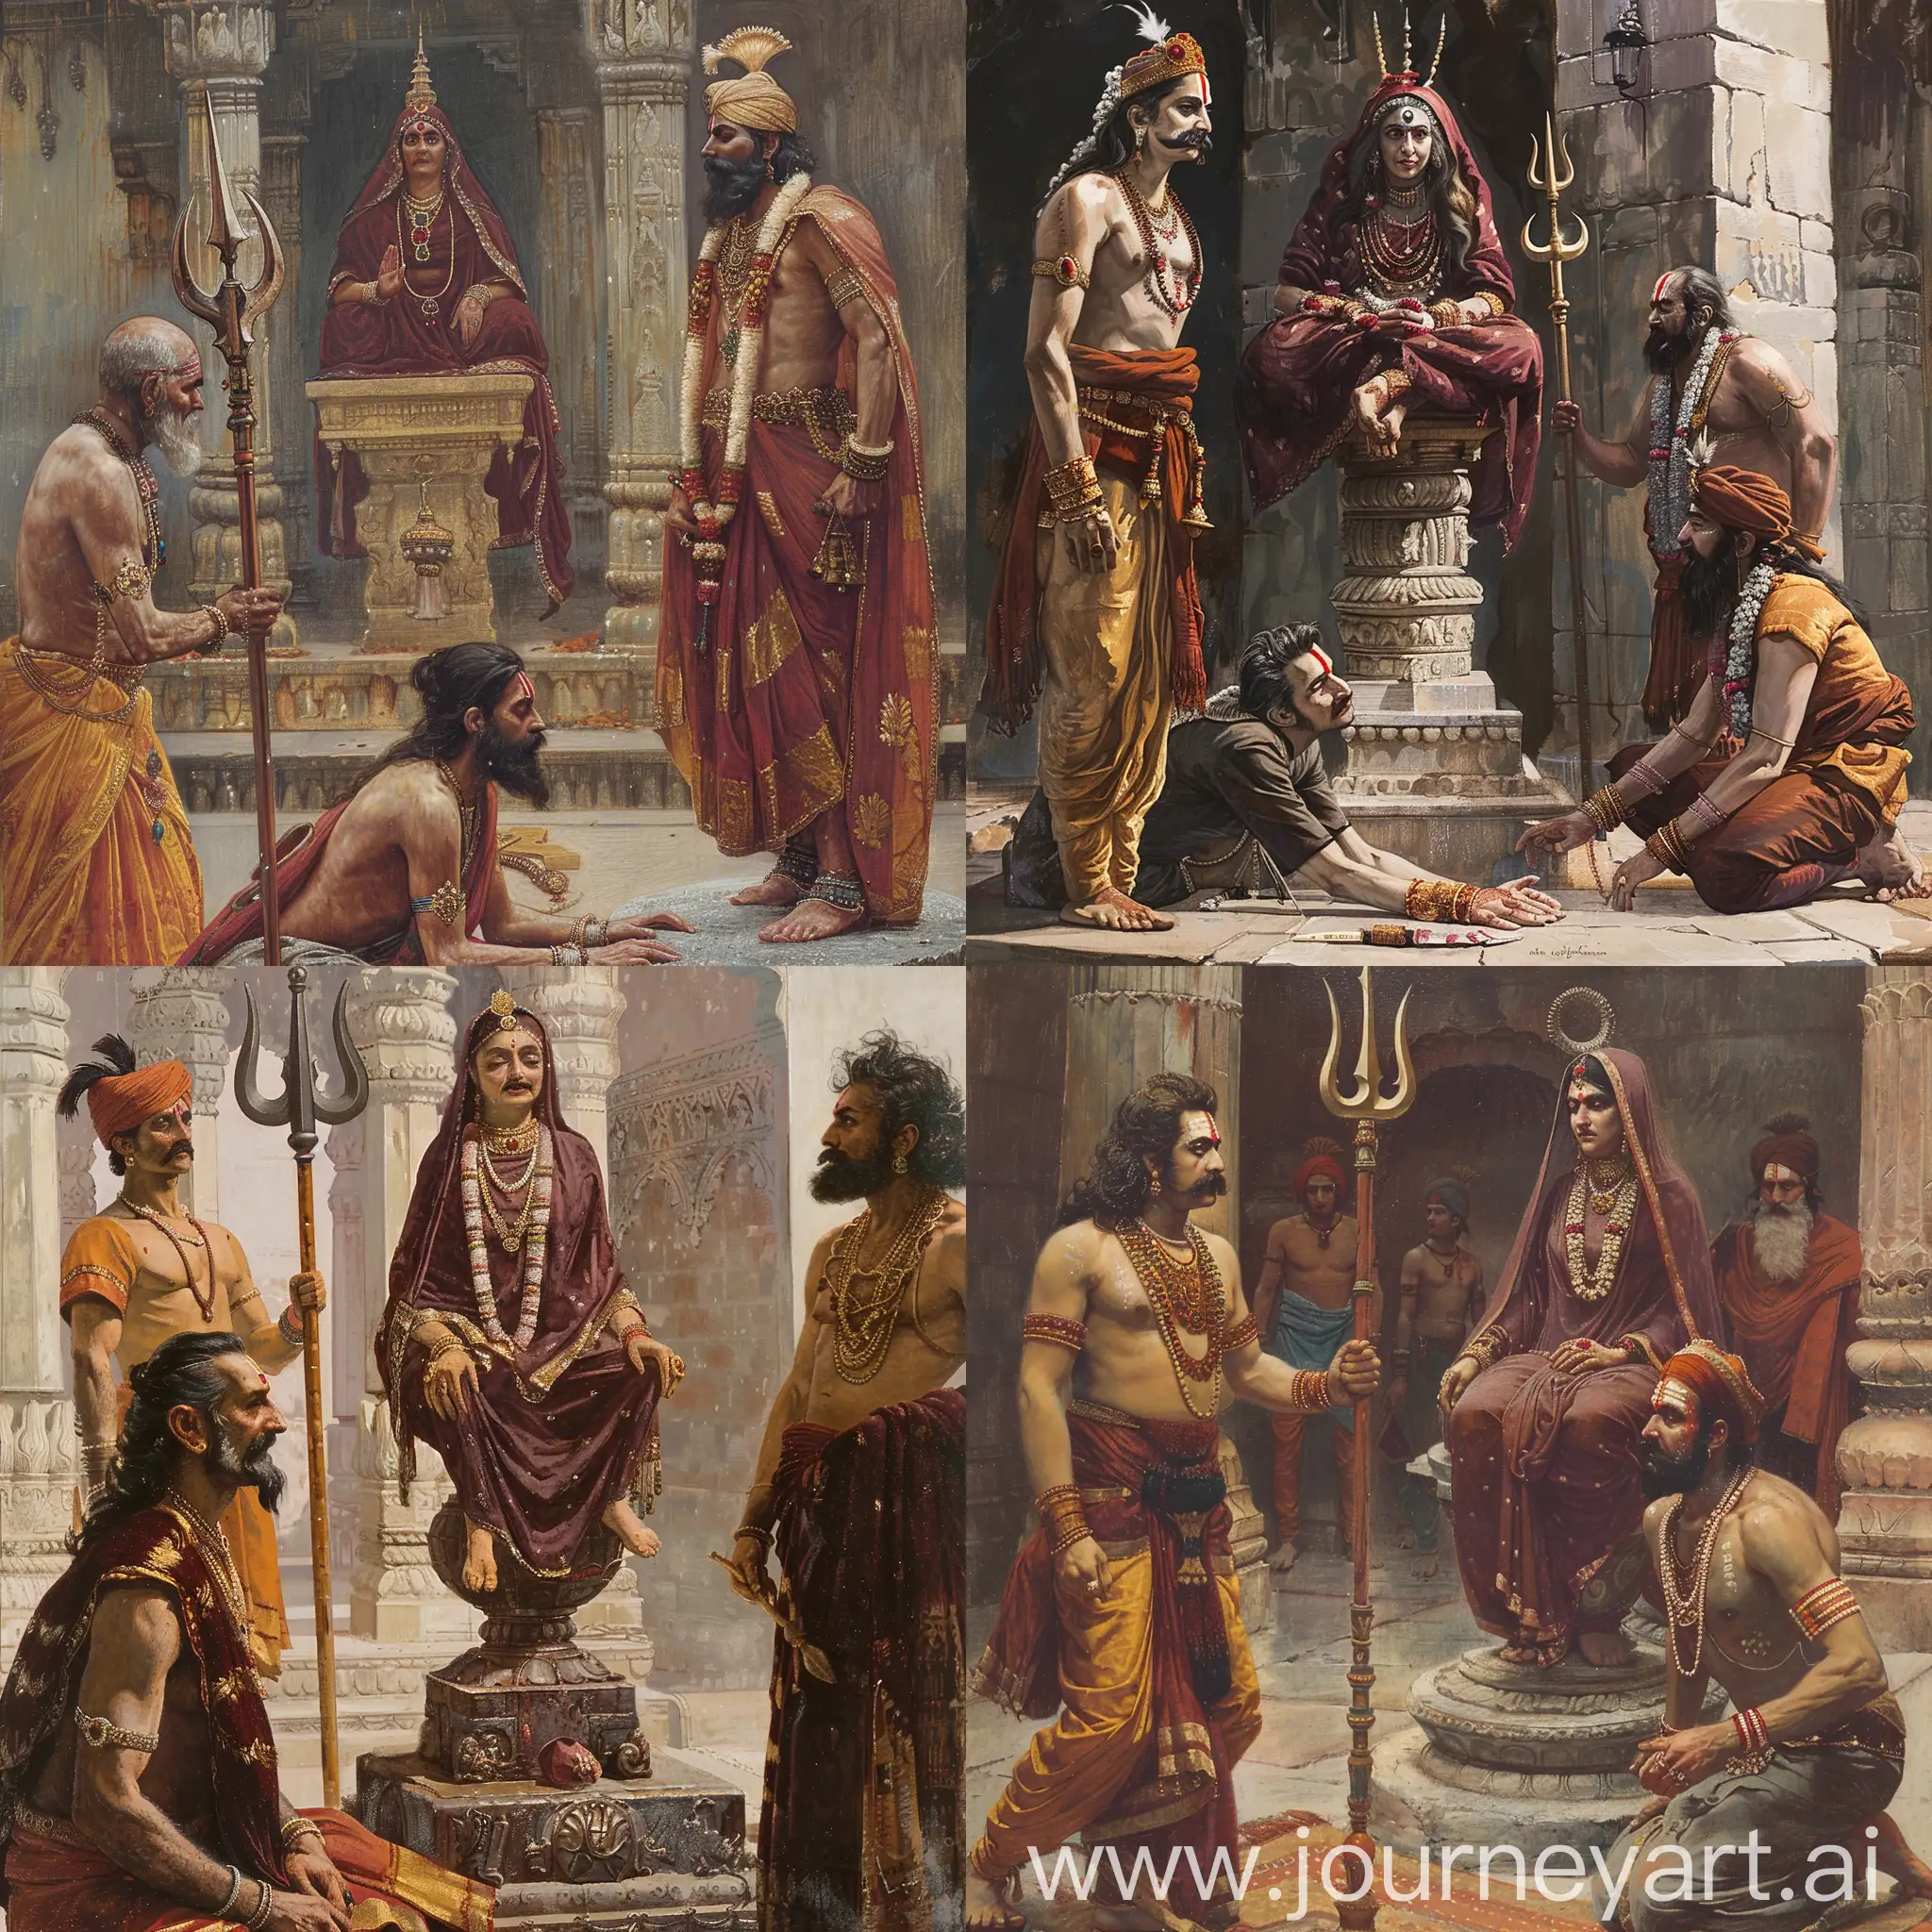 Young-Rajput-King-Bowing-to-Maroonrobed-Indian-Lady-Saint-with-Trident